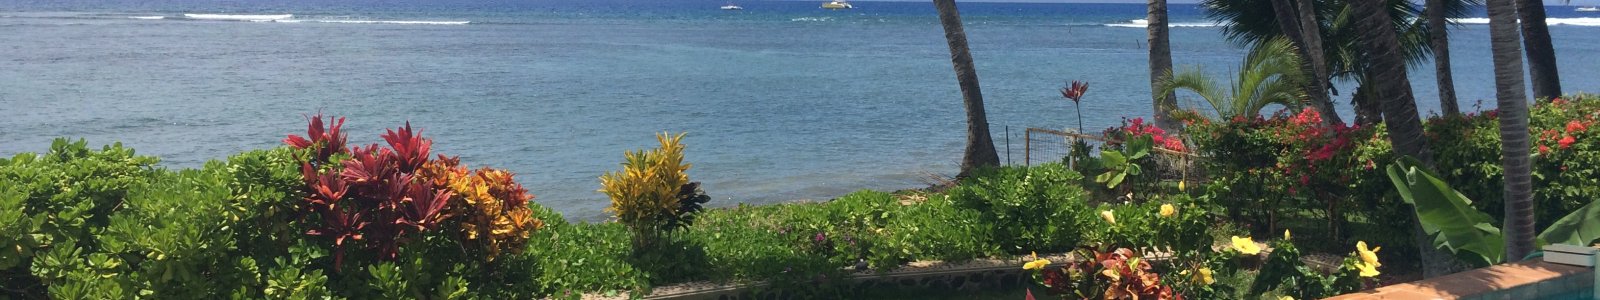 Maui Vacation Home Inspections – Is Your Rental Agent Looking Out for You?